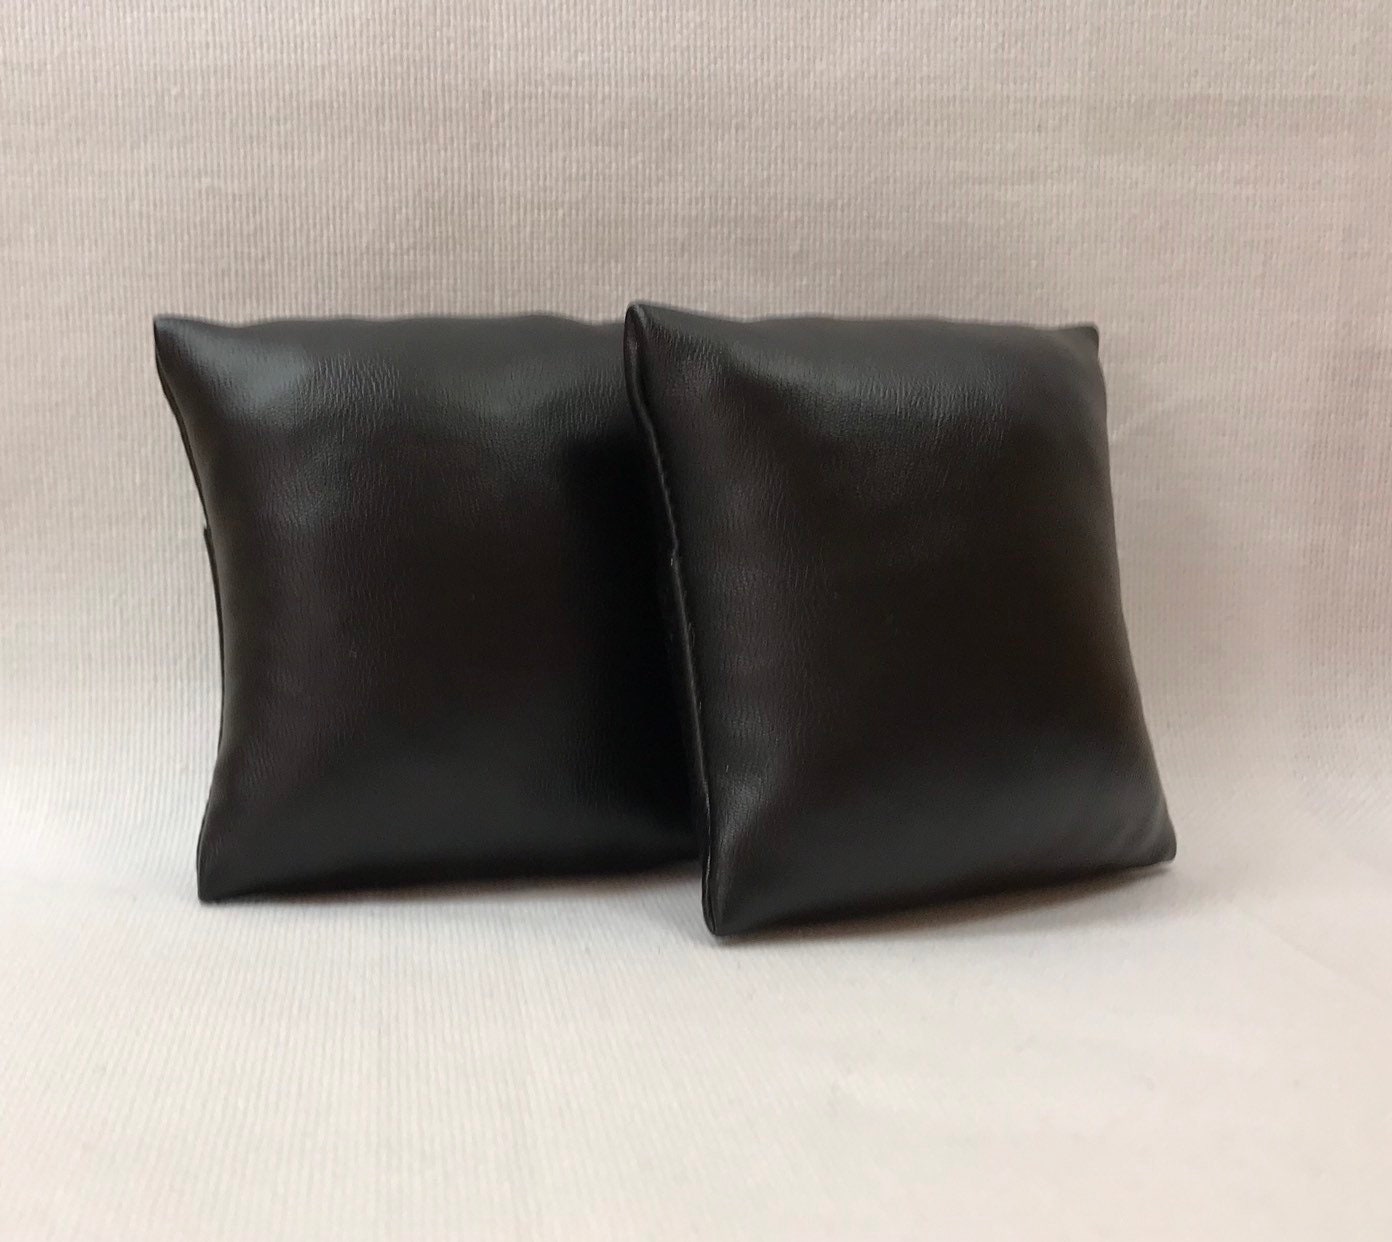 2 Black Leatherette Jewelry display pillow for Bracelets or | Etsy